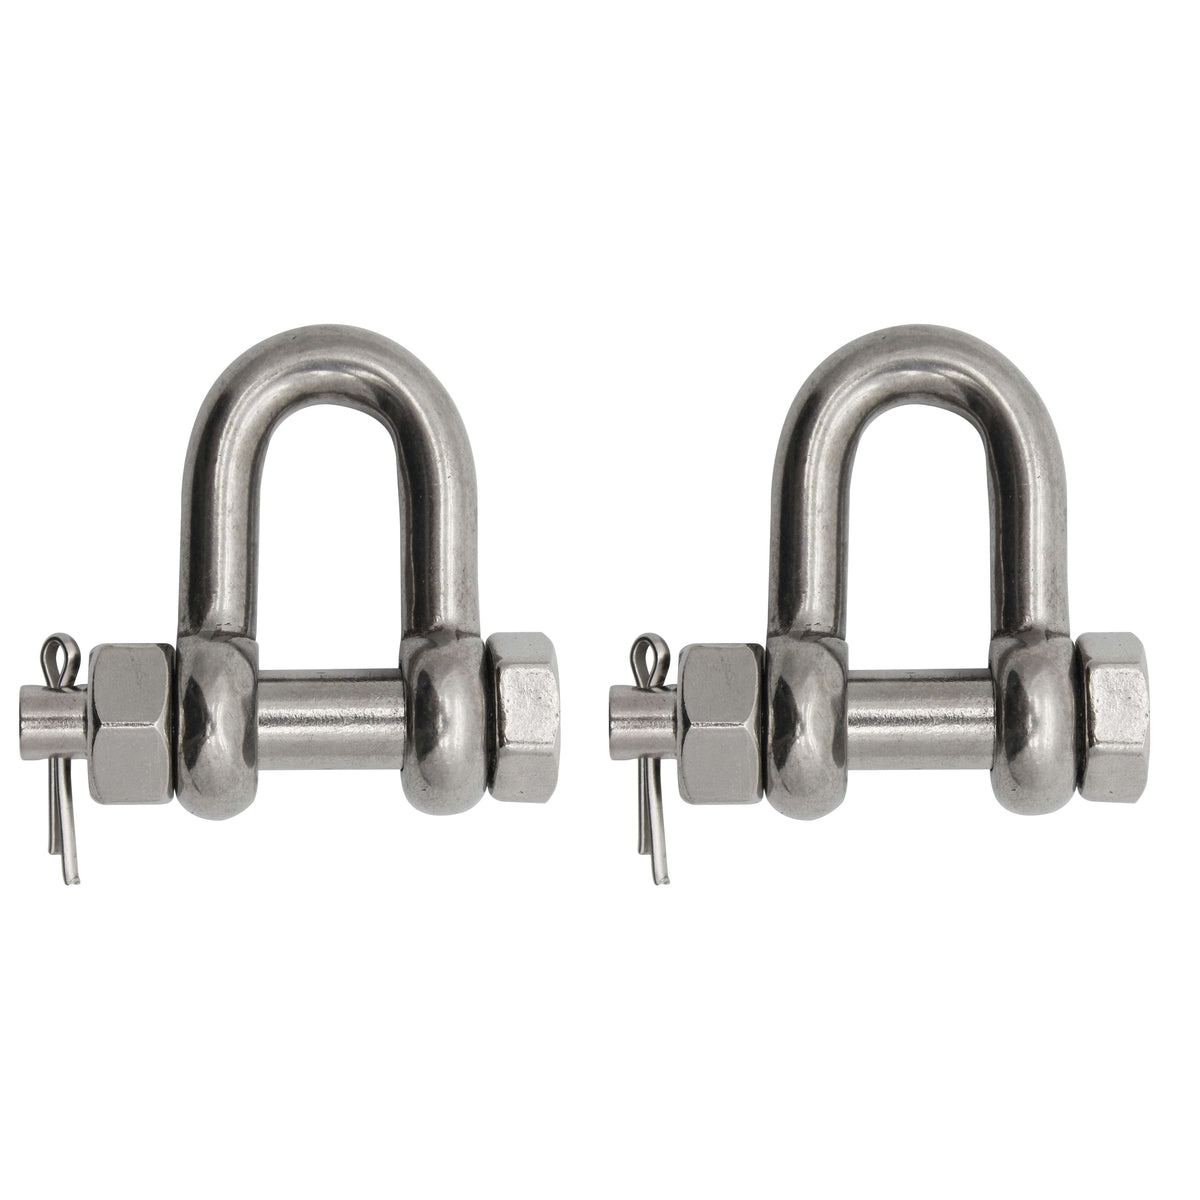 Extreme Max SS Bolt-Type Chain Shackle 1/4" 2-pk #3006.8339.2